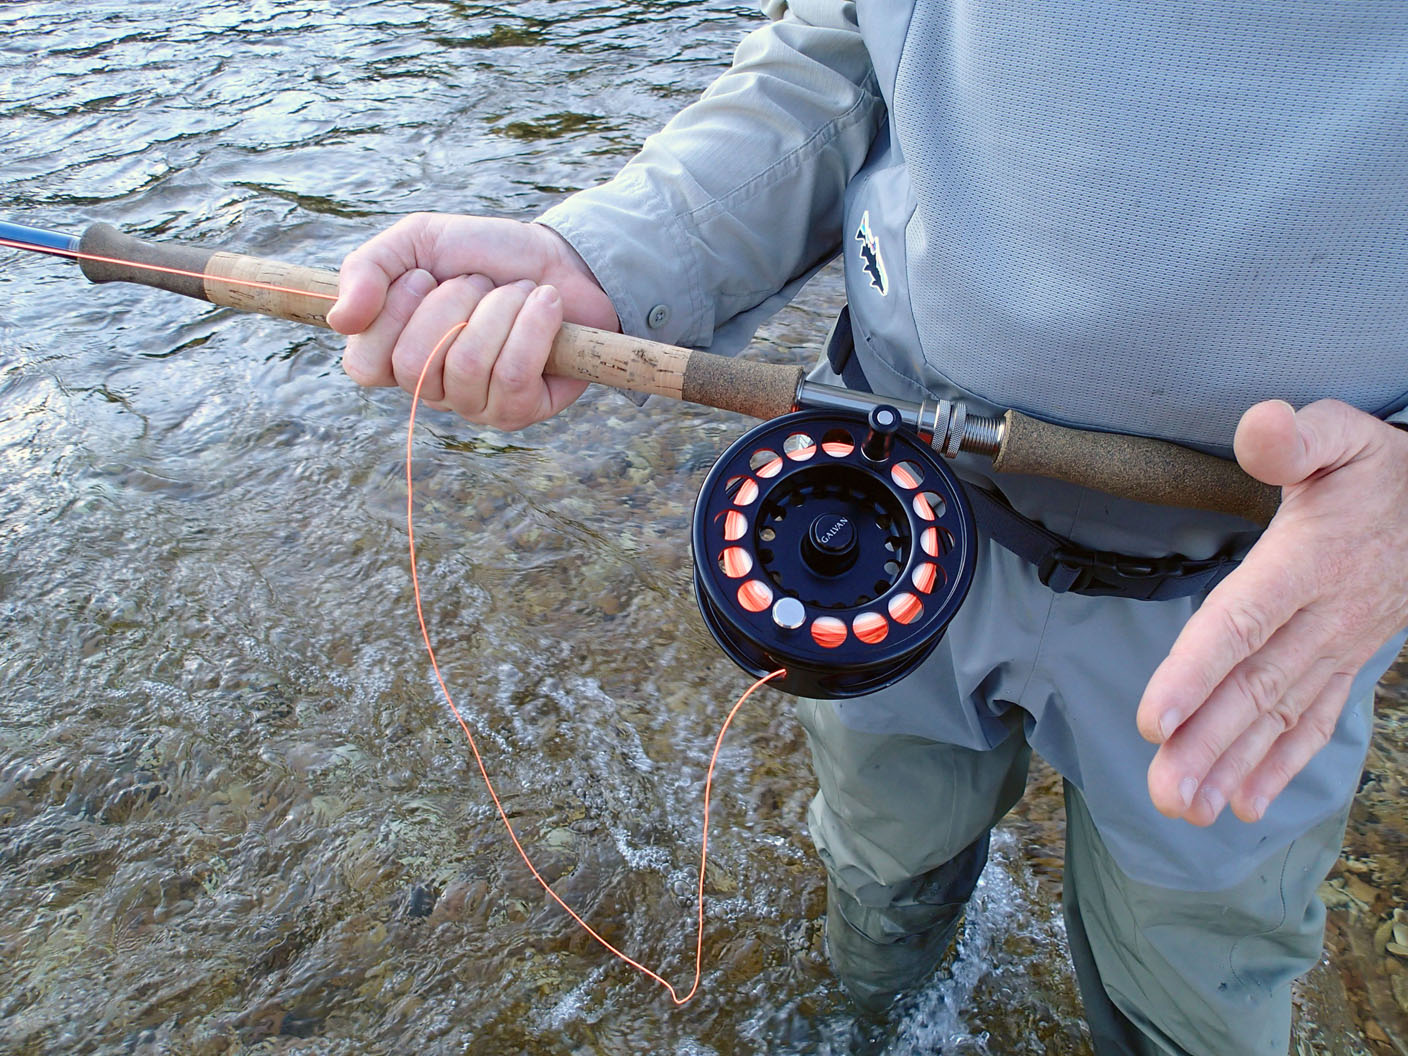 Fly fishing technique started in Scotland comes to White River